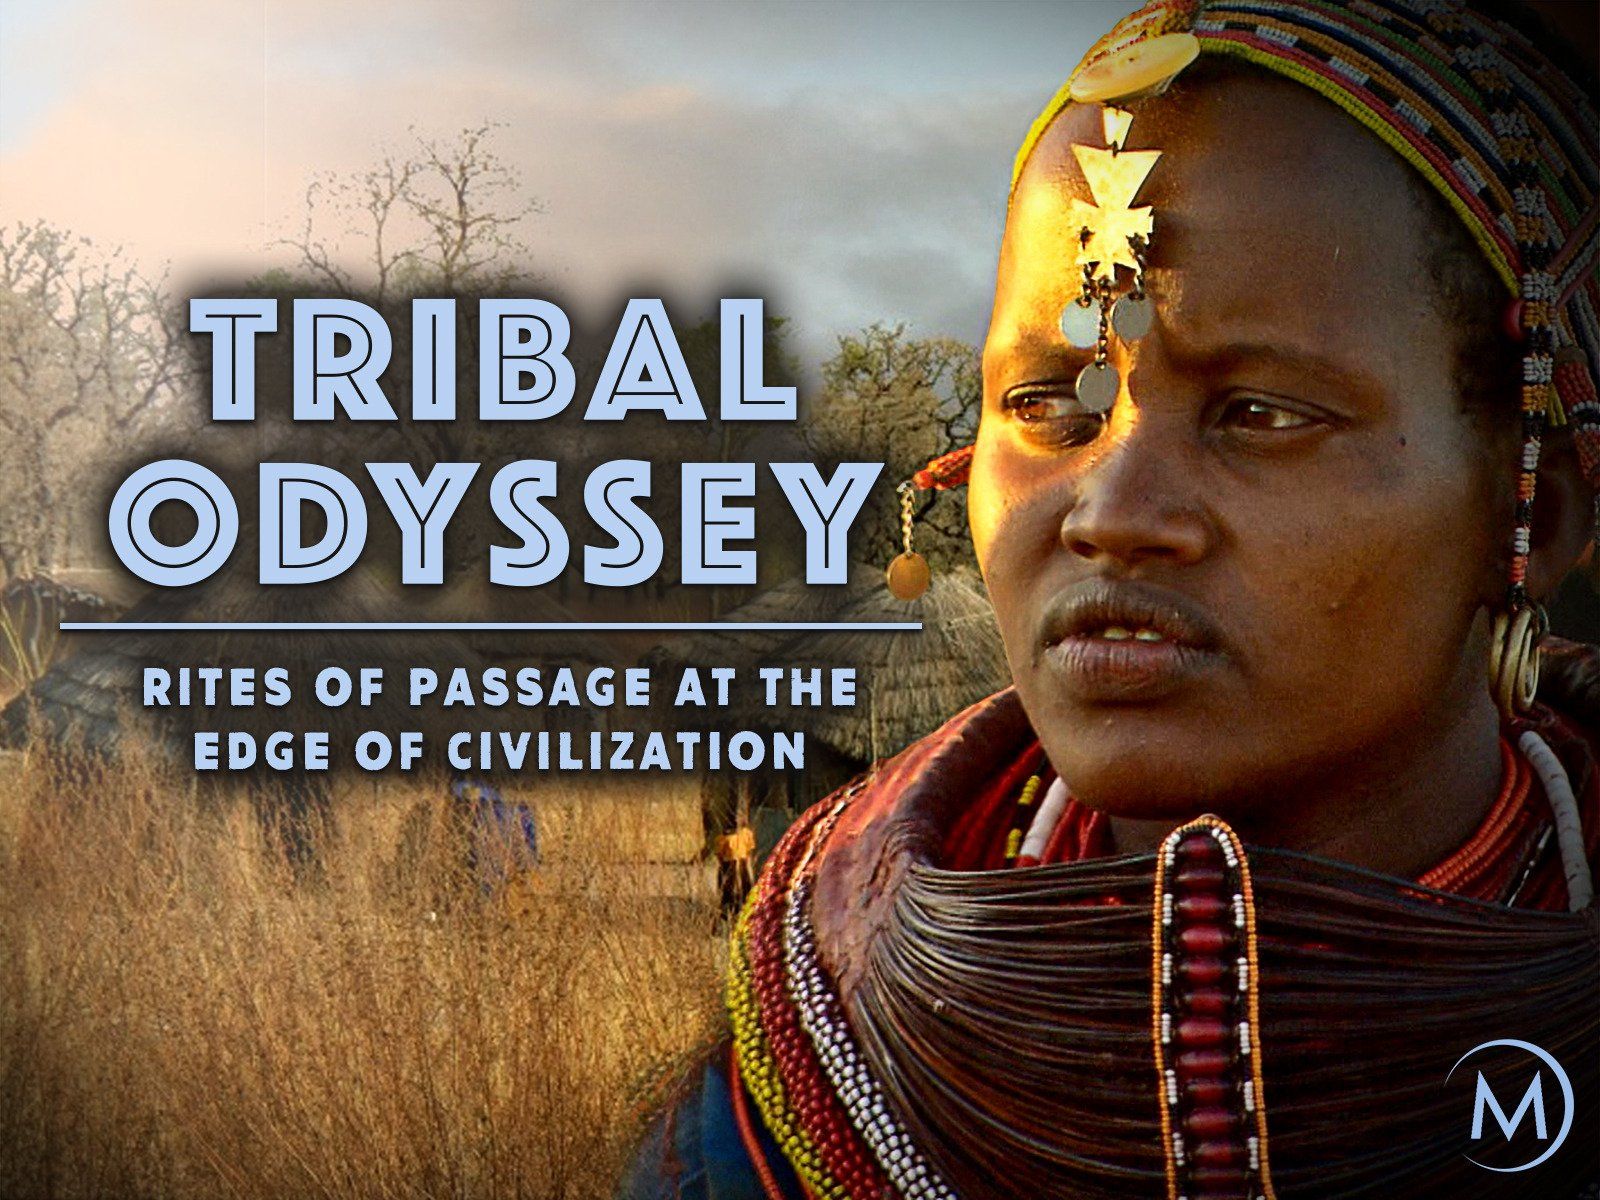 Tribal Odyssey: Rites of Passage at the Edge